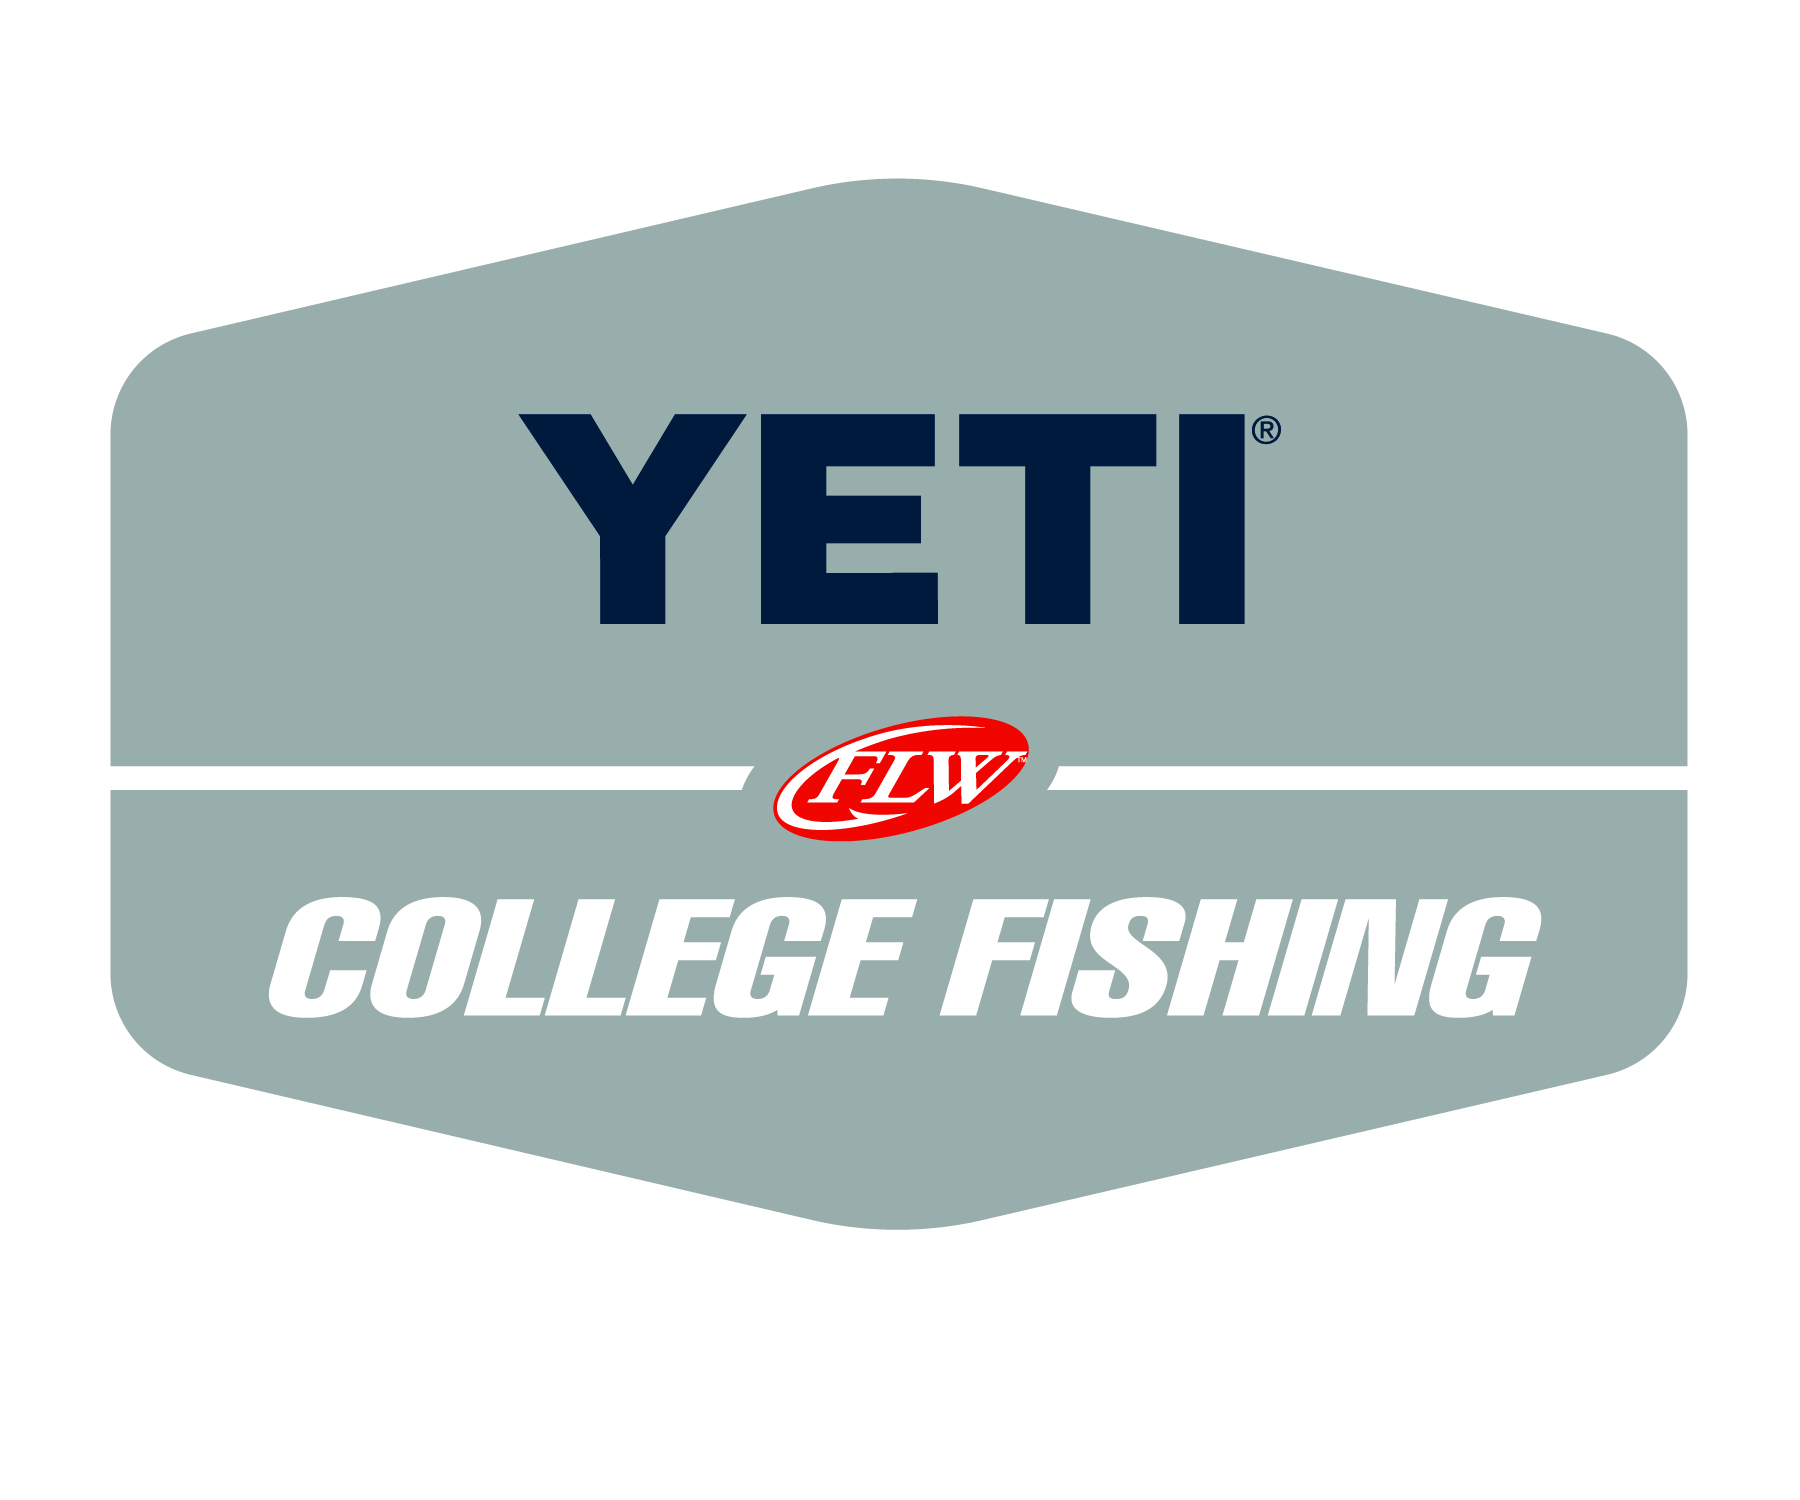 Fishing League Worldwide (FLW), the world’s largest tournament-fishing organization, today announced the renewal of its partnership with YETI®, in which the leading premium outdoor brand will continue to serve as title sponsor of the FLW College Fishing circuit. 